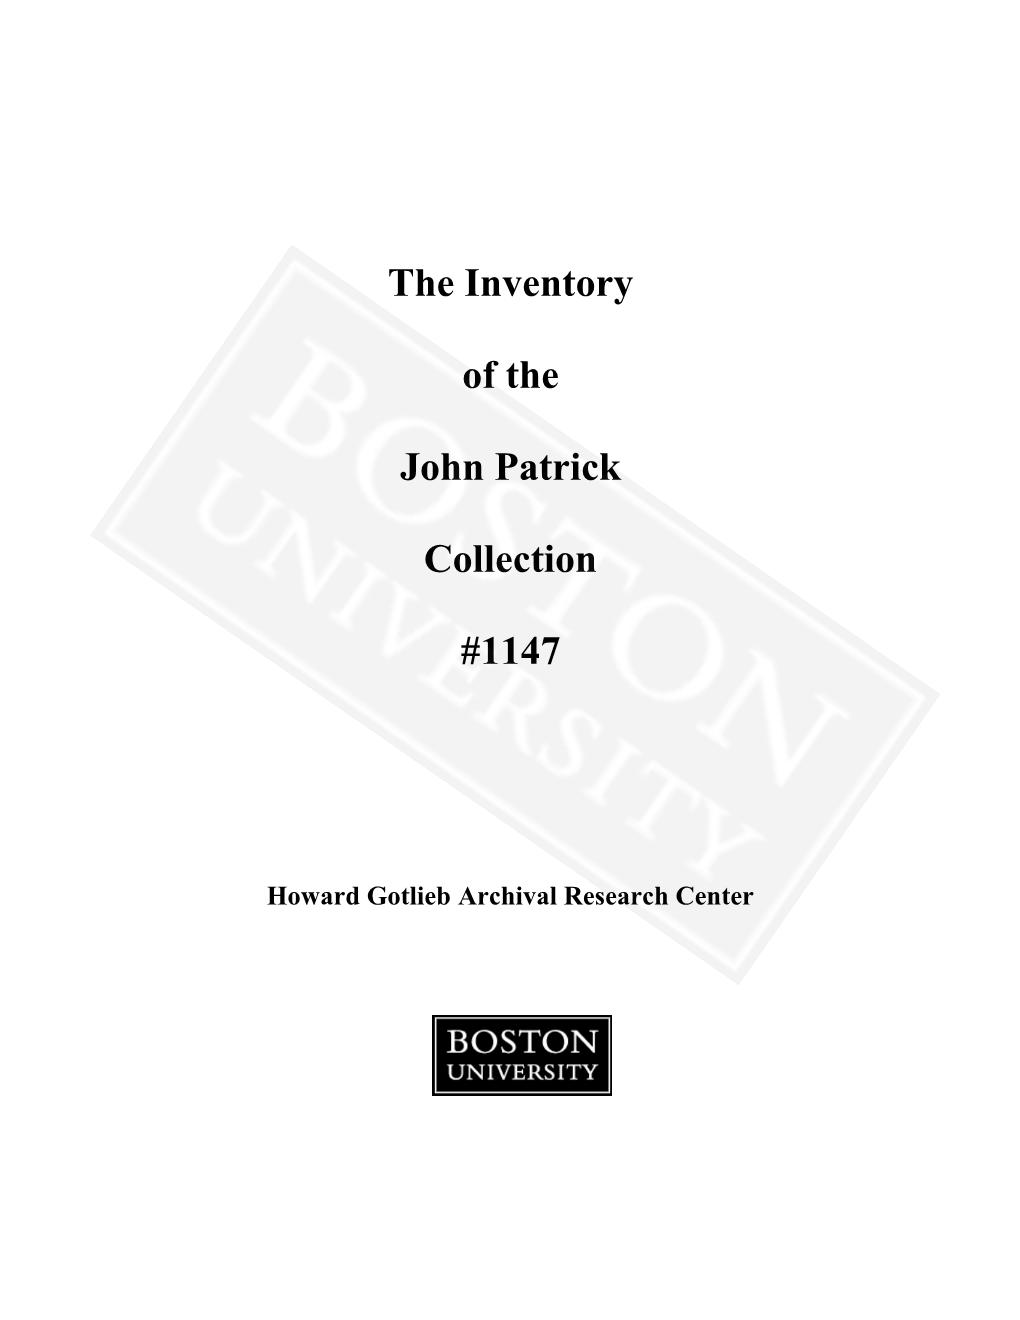 The Inventory of the John Patrick Collection #1147